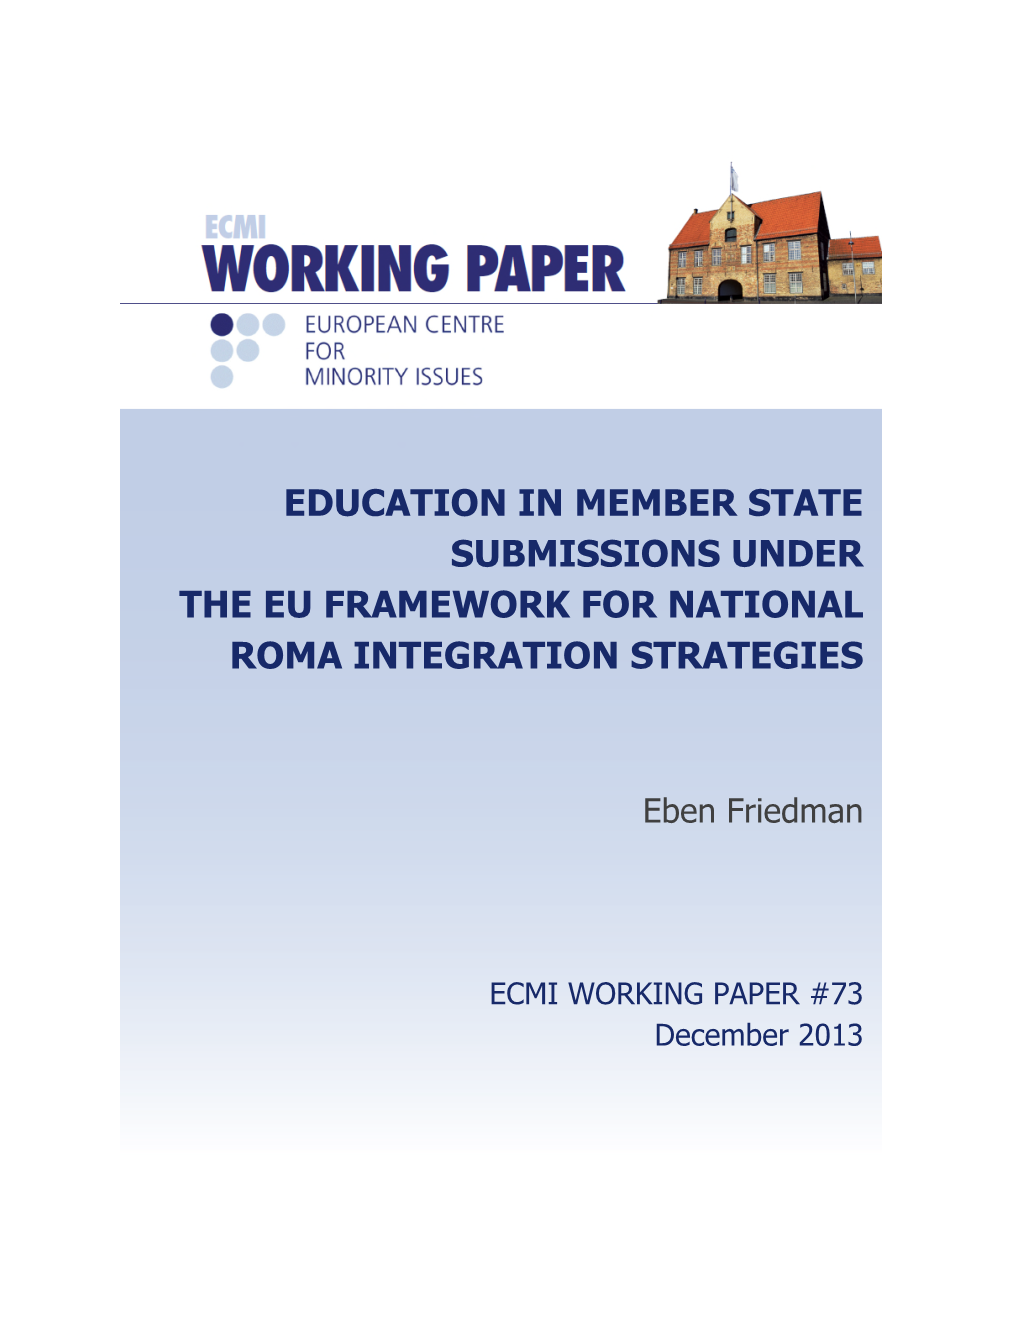 Education in Member State Submissions Under the Eu Framework for National Roma Integration Strategies